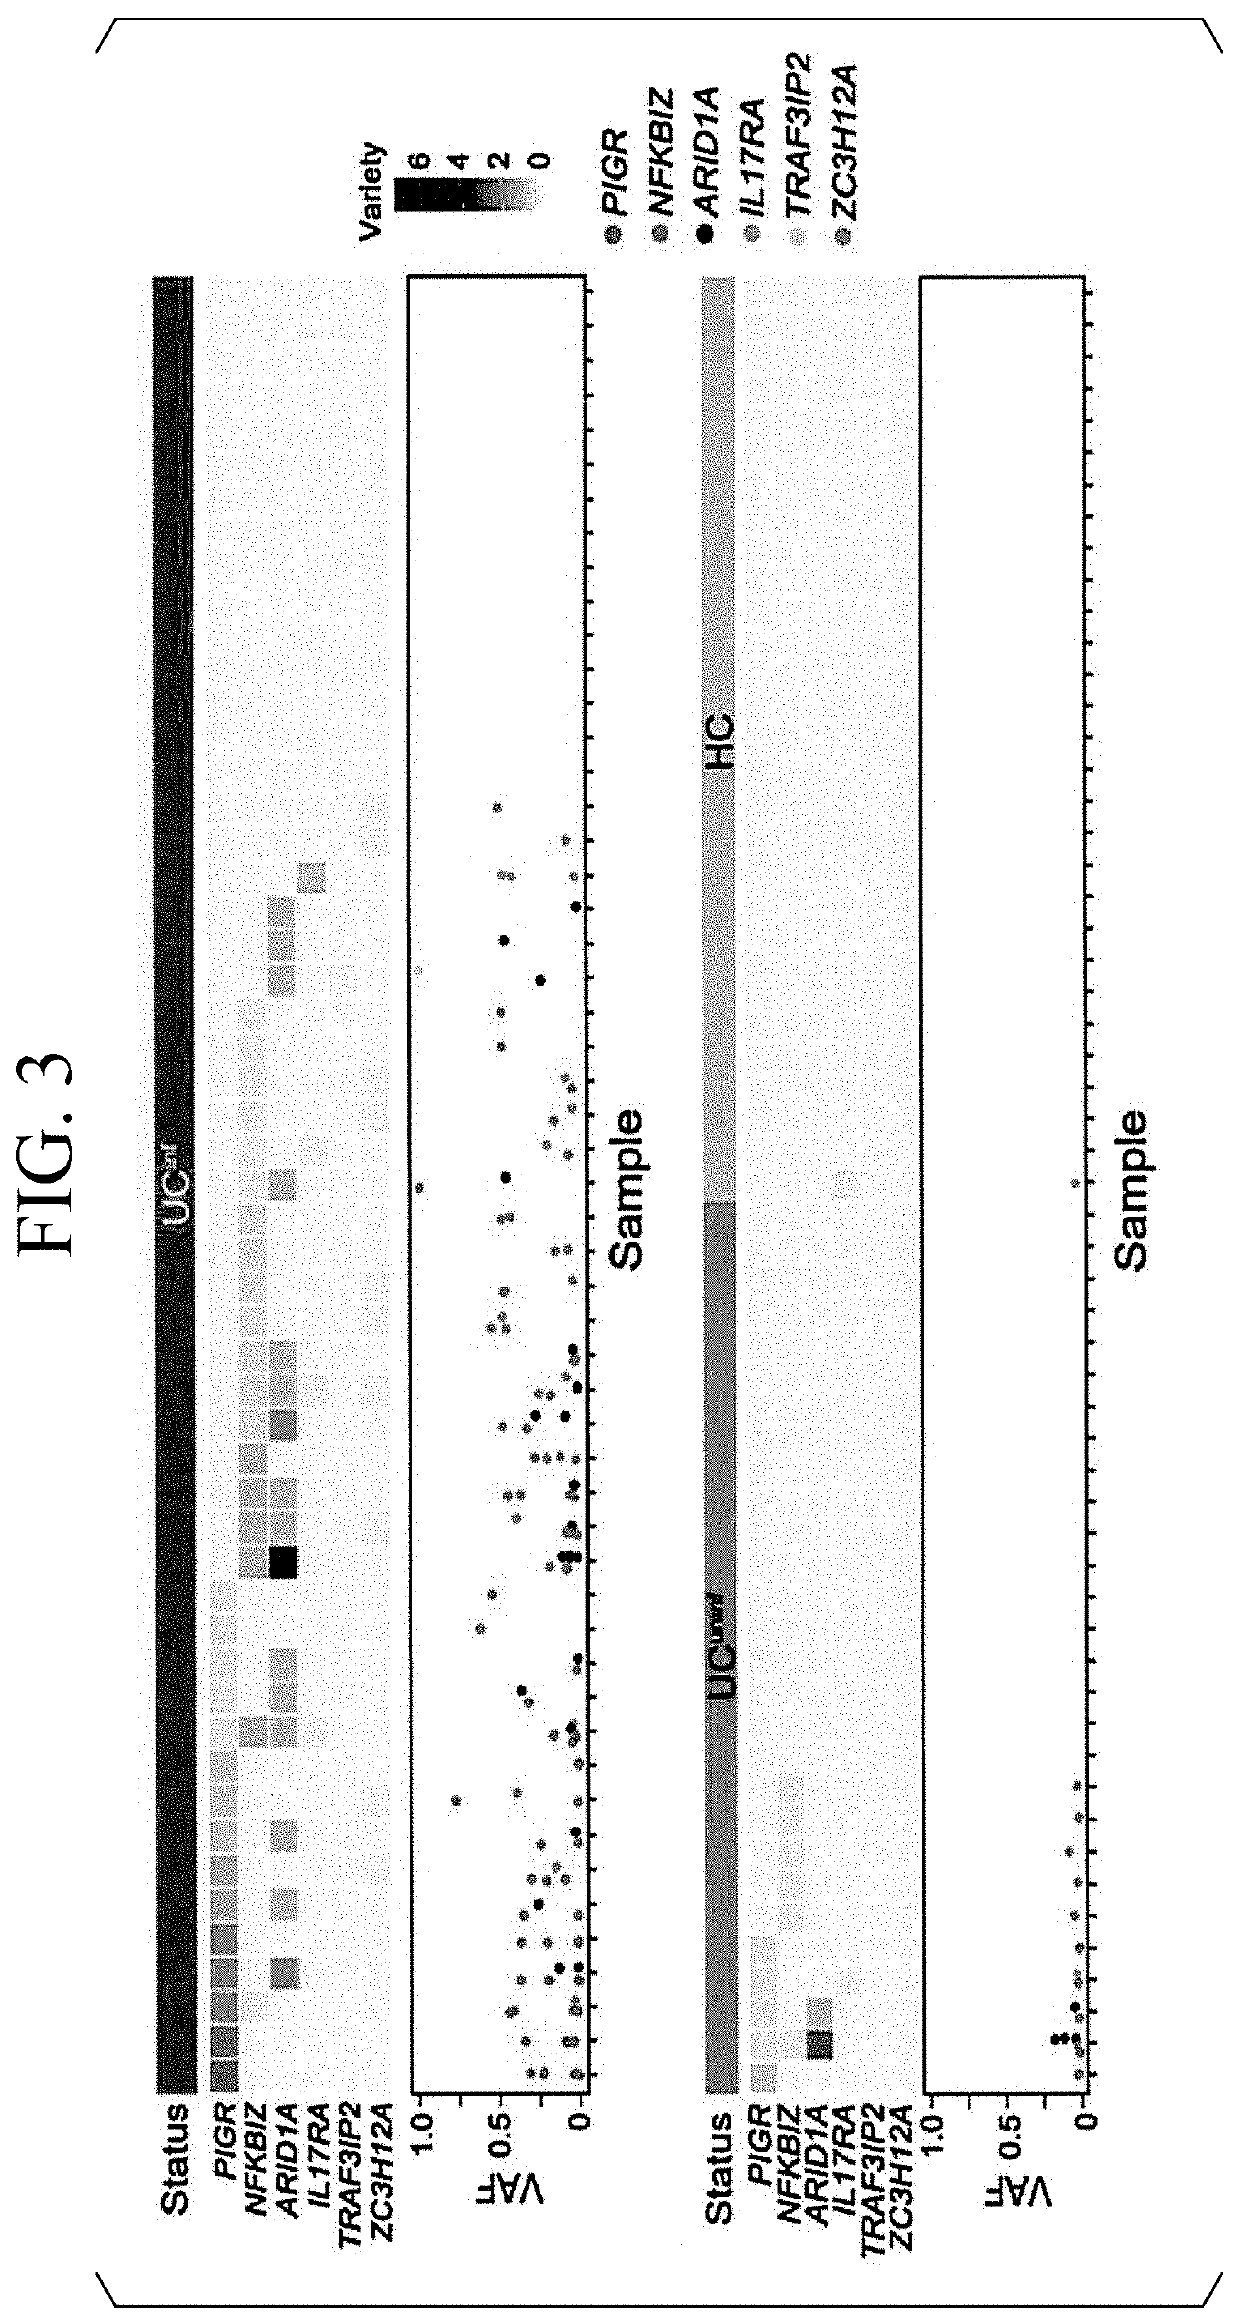 Method and kit for detecting risk of colorectal cancer